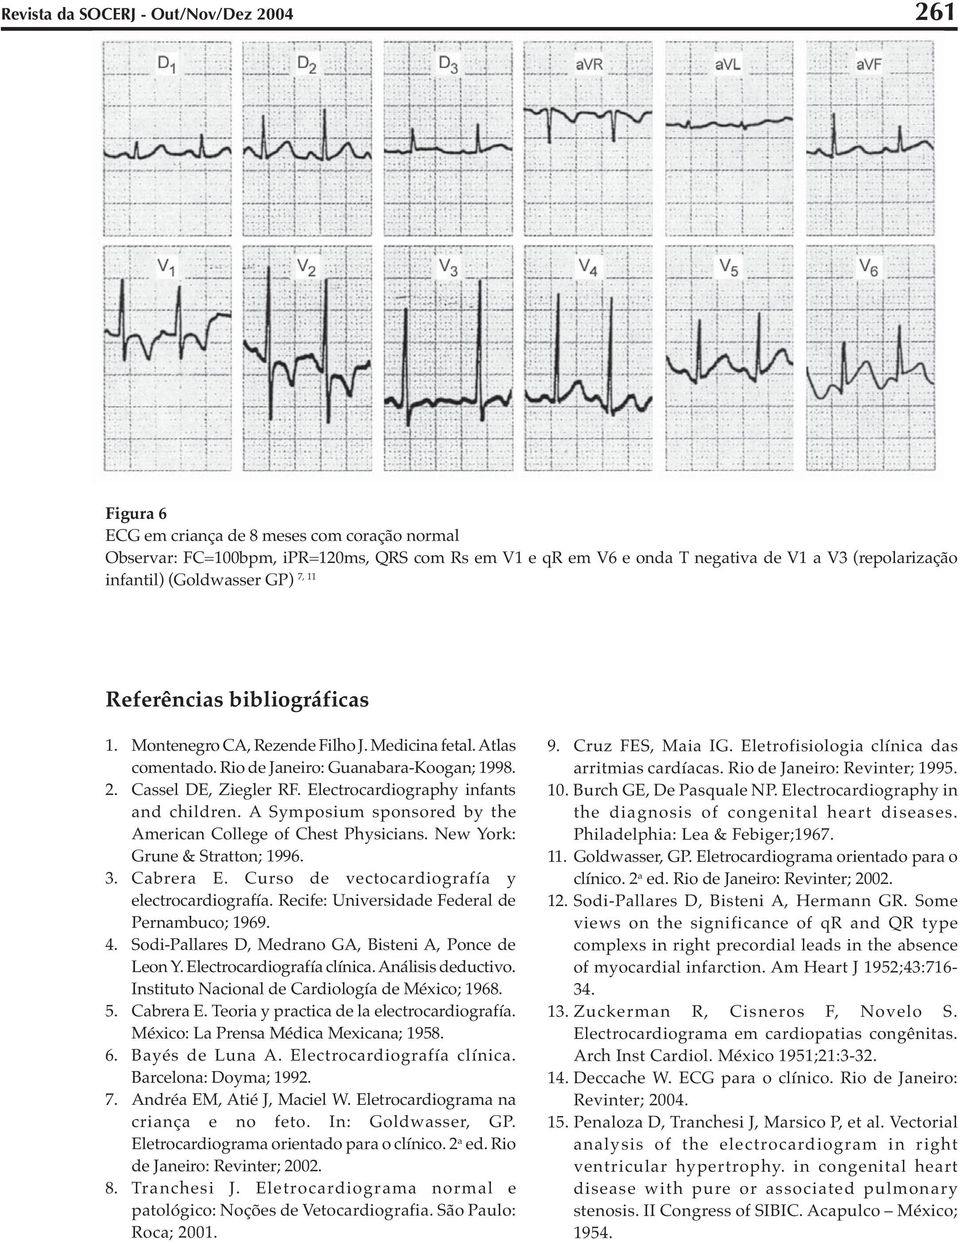 Electrocardiography infants and children. A Symposium sponsored by the American College of Chest Physicians. New York: Grune & Stratton; 1996. 3. Cabrera E.